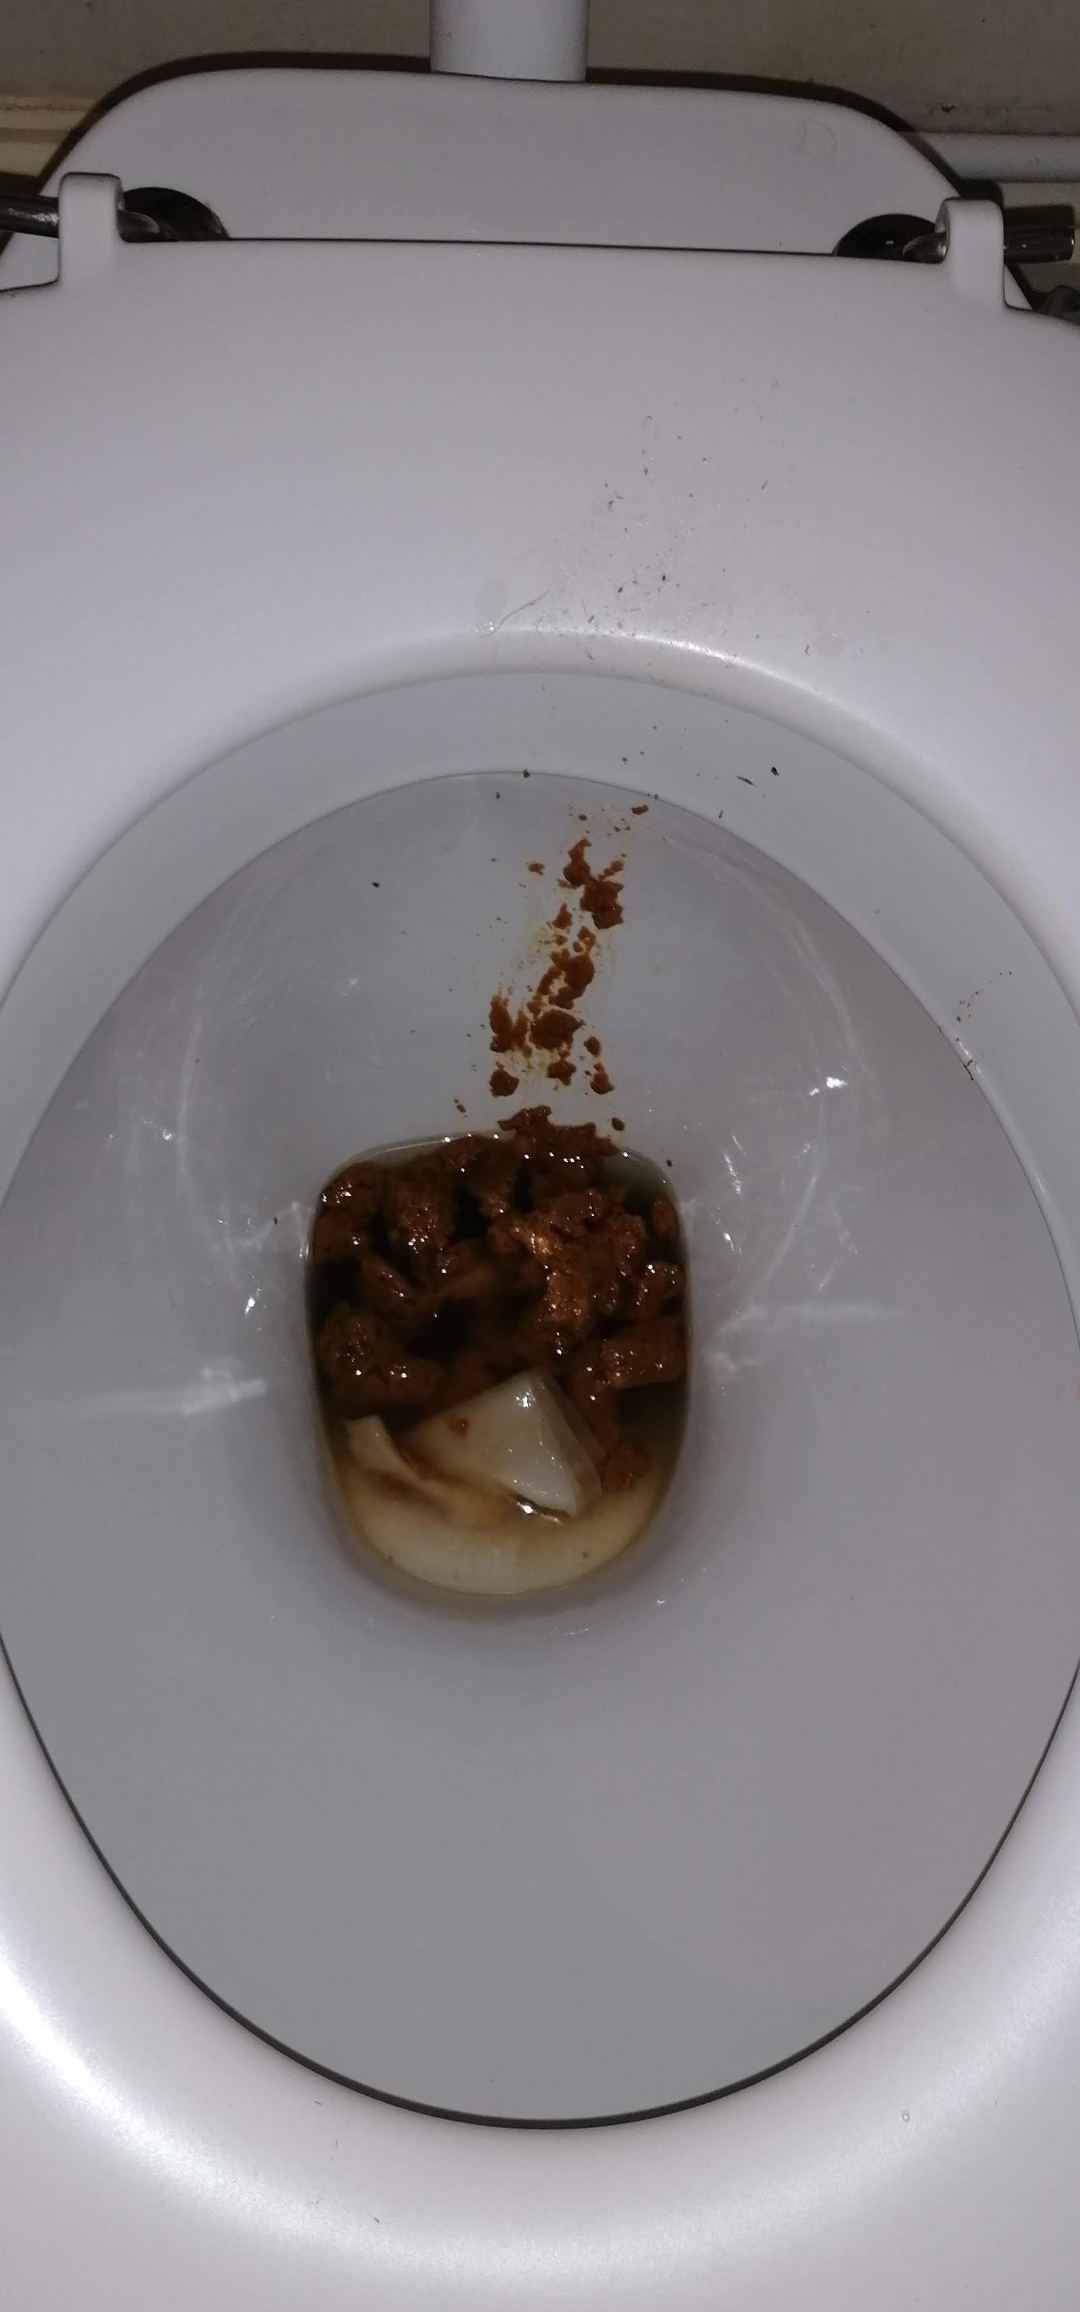 Having a loose shit on my mate toilet before work this morning